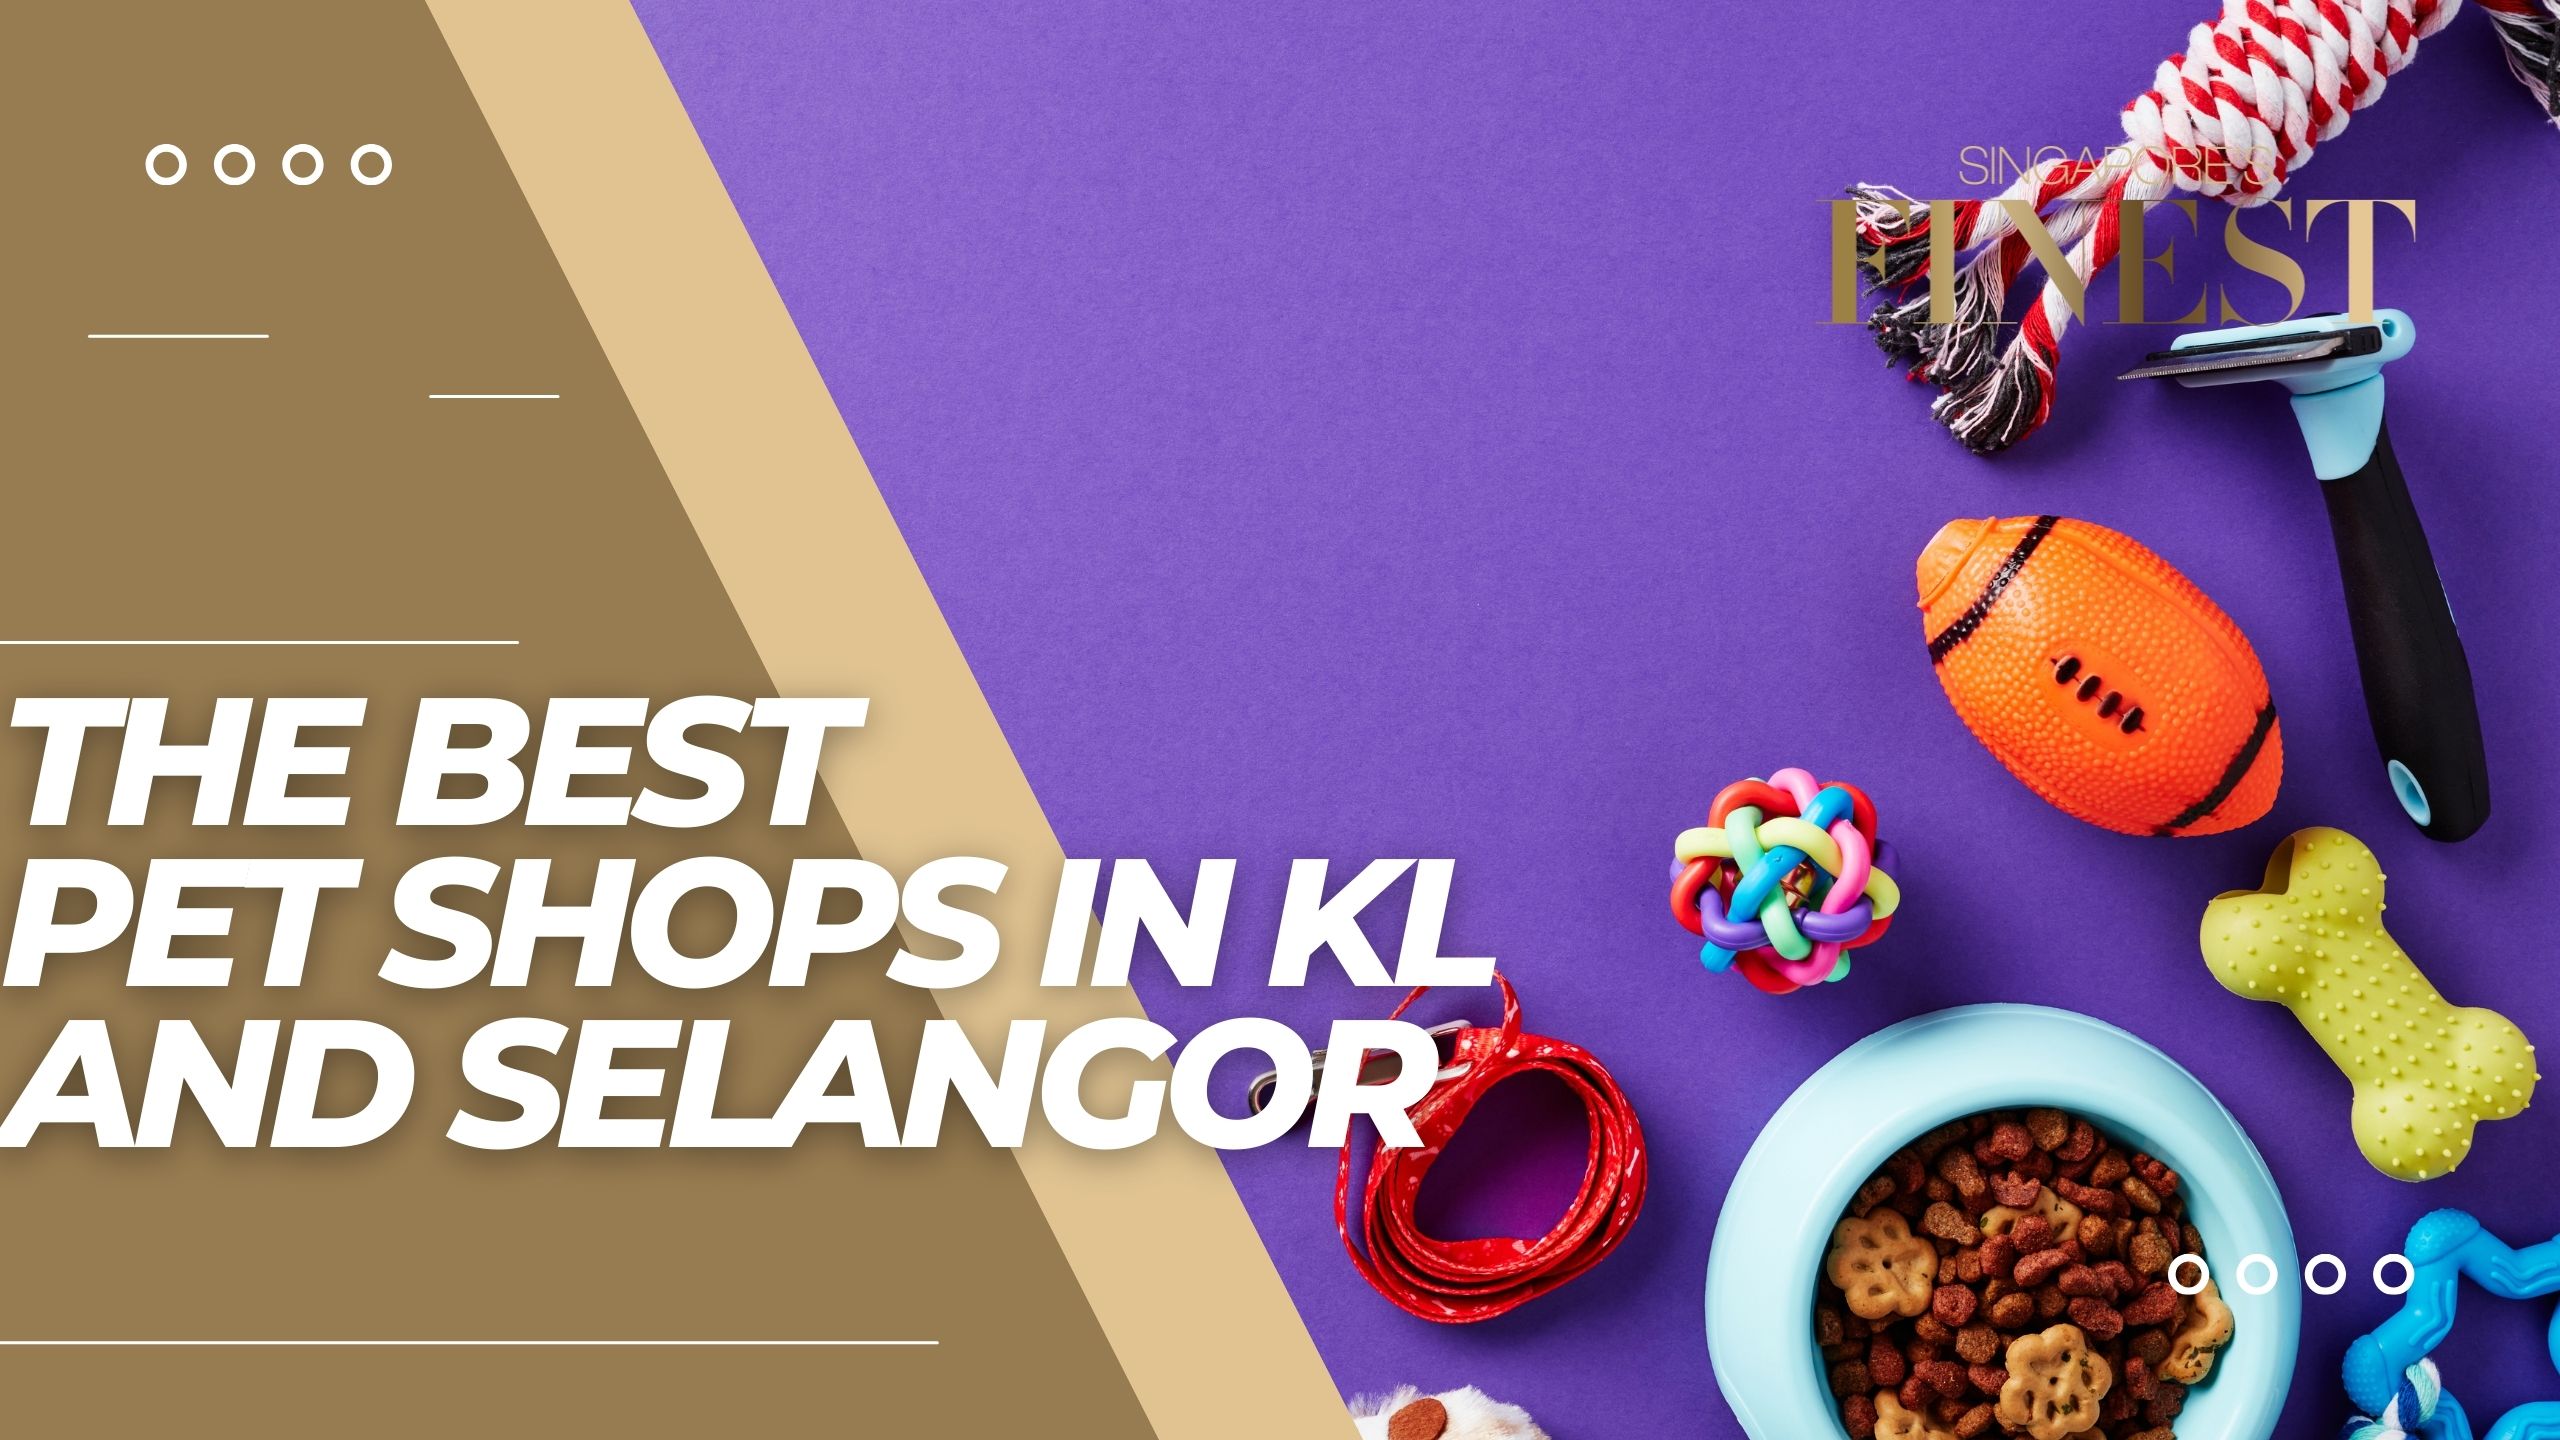 The Finest Pet Shops in KL and Selangor